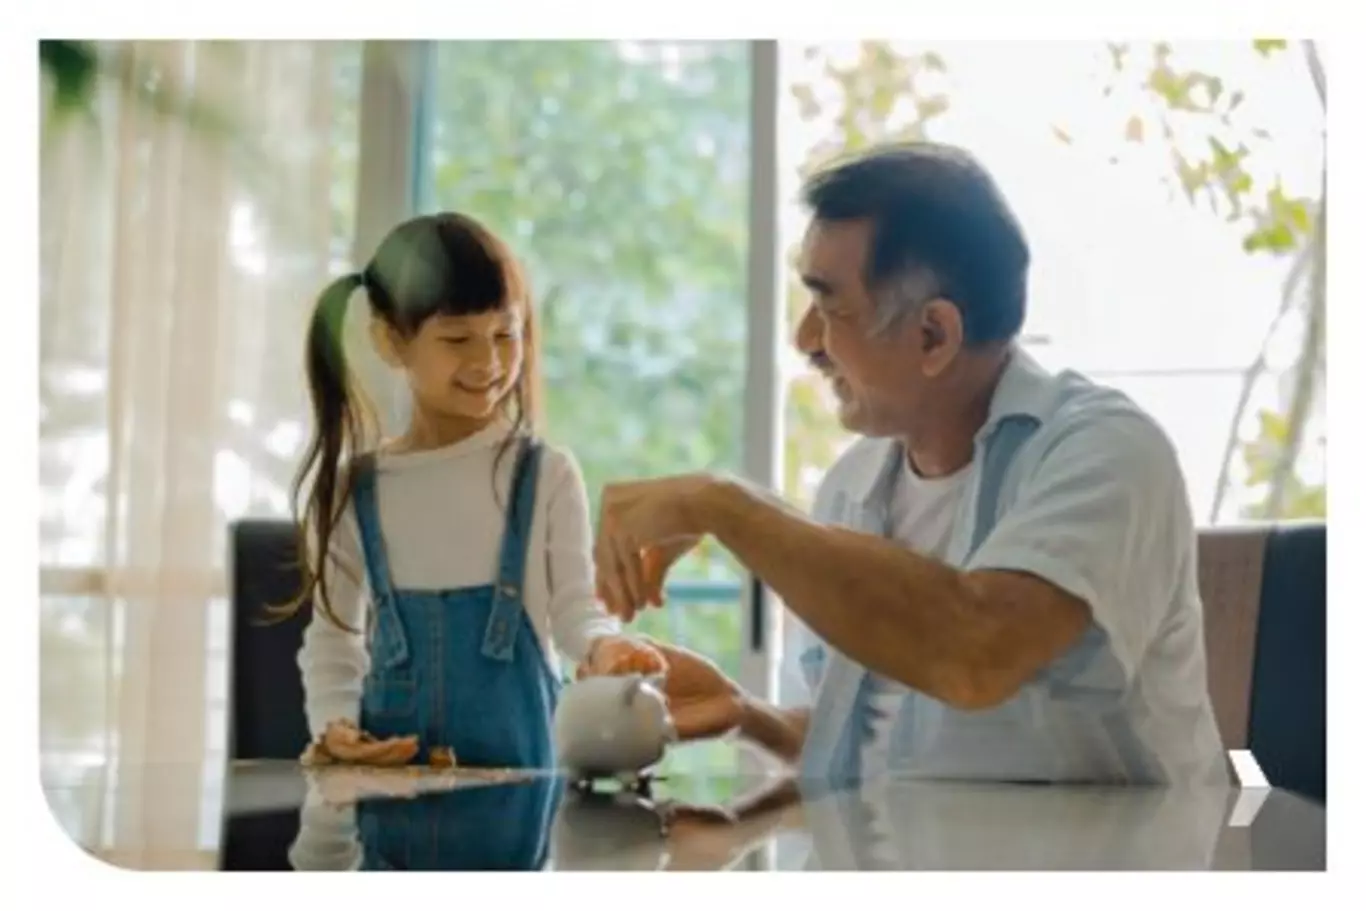 Little girl putting coins into piggy bank with her grandfather